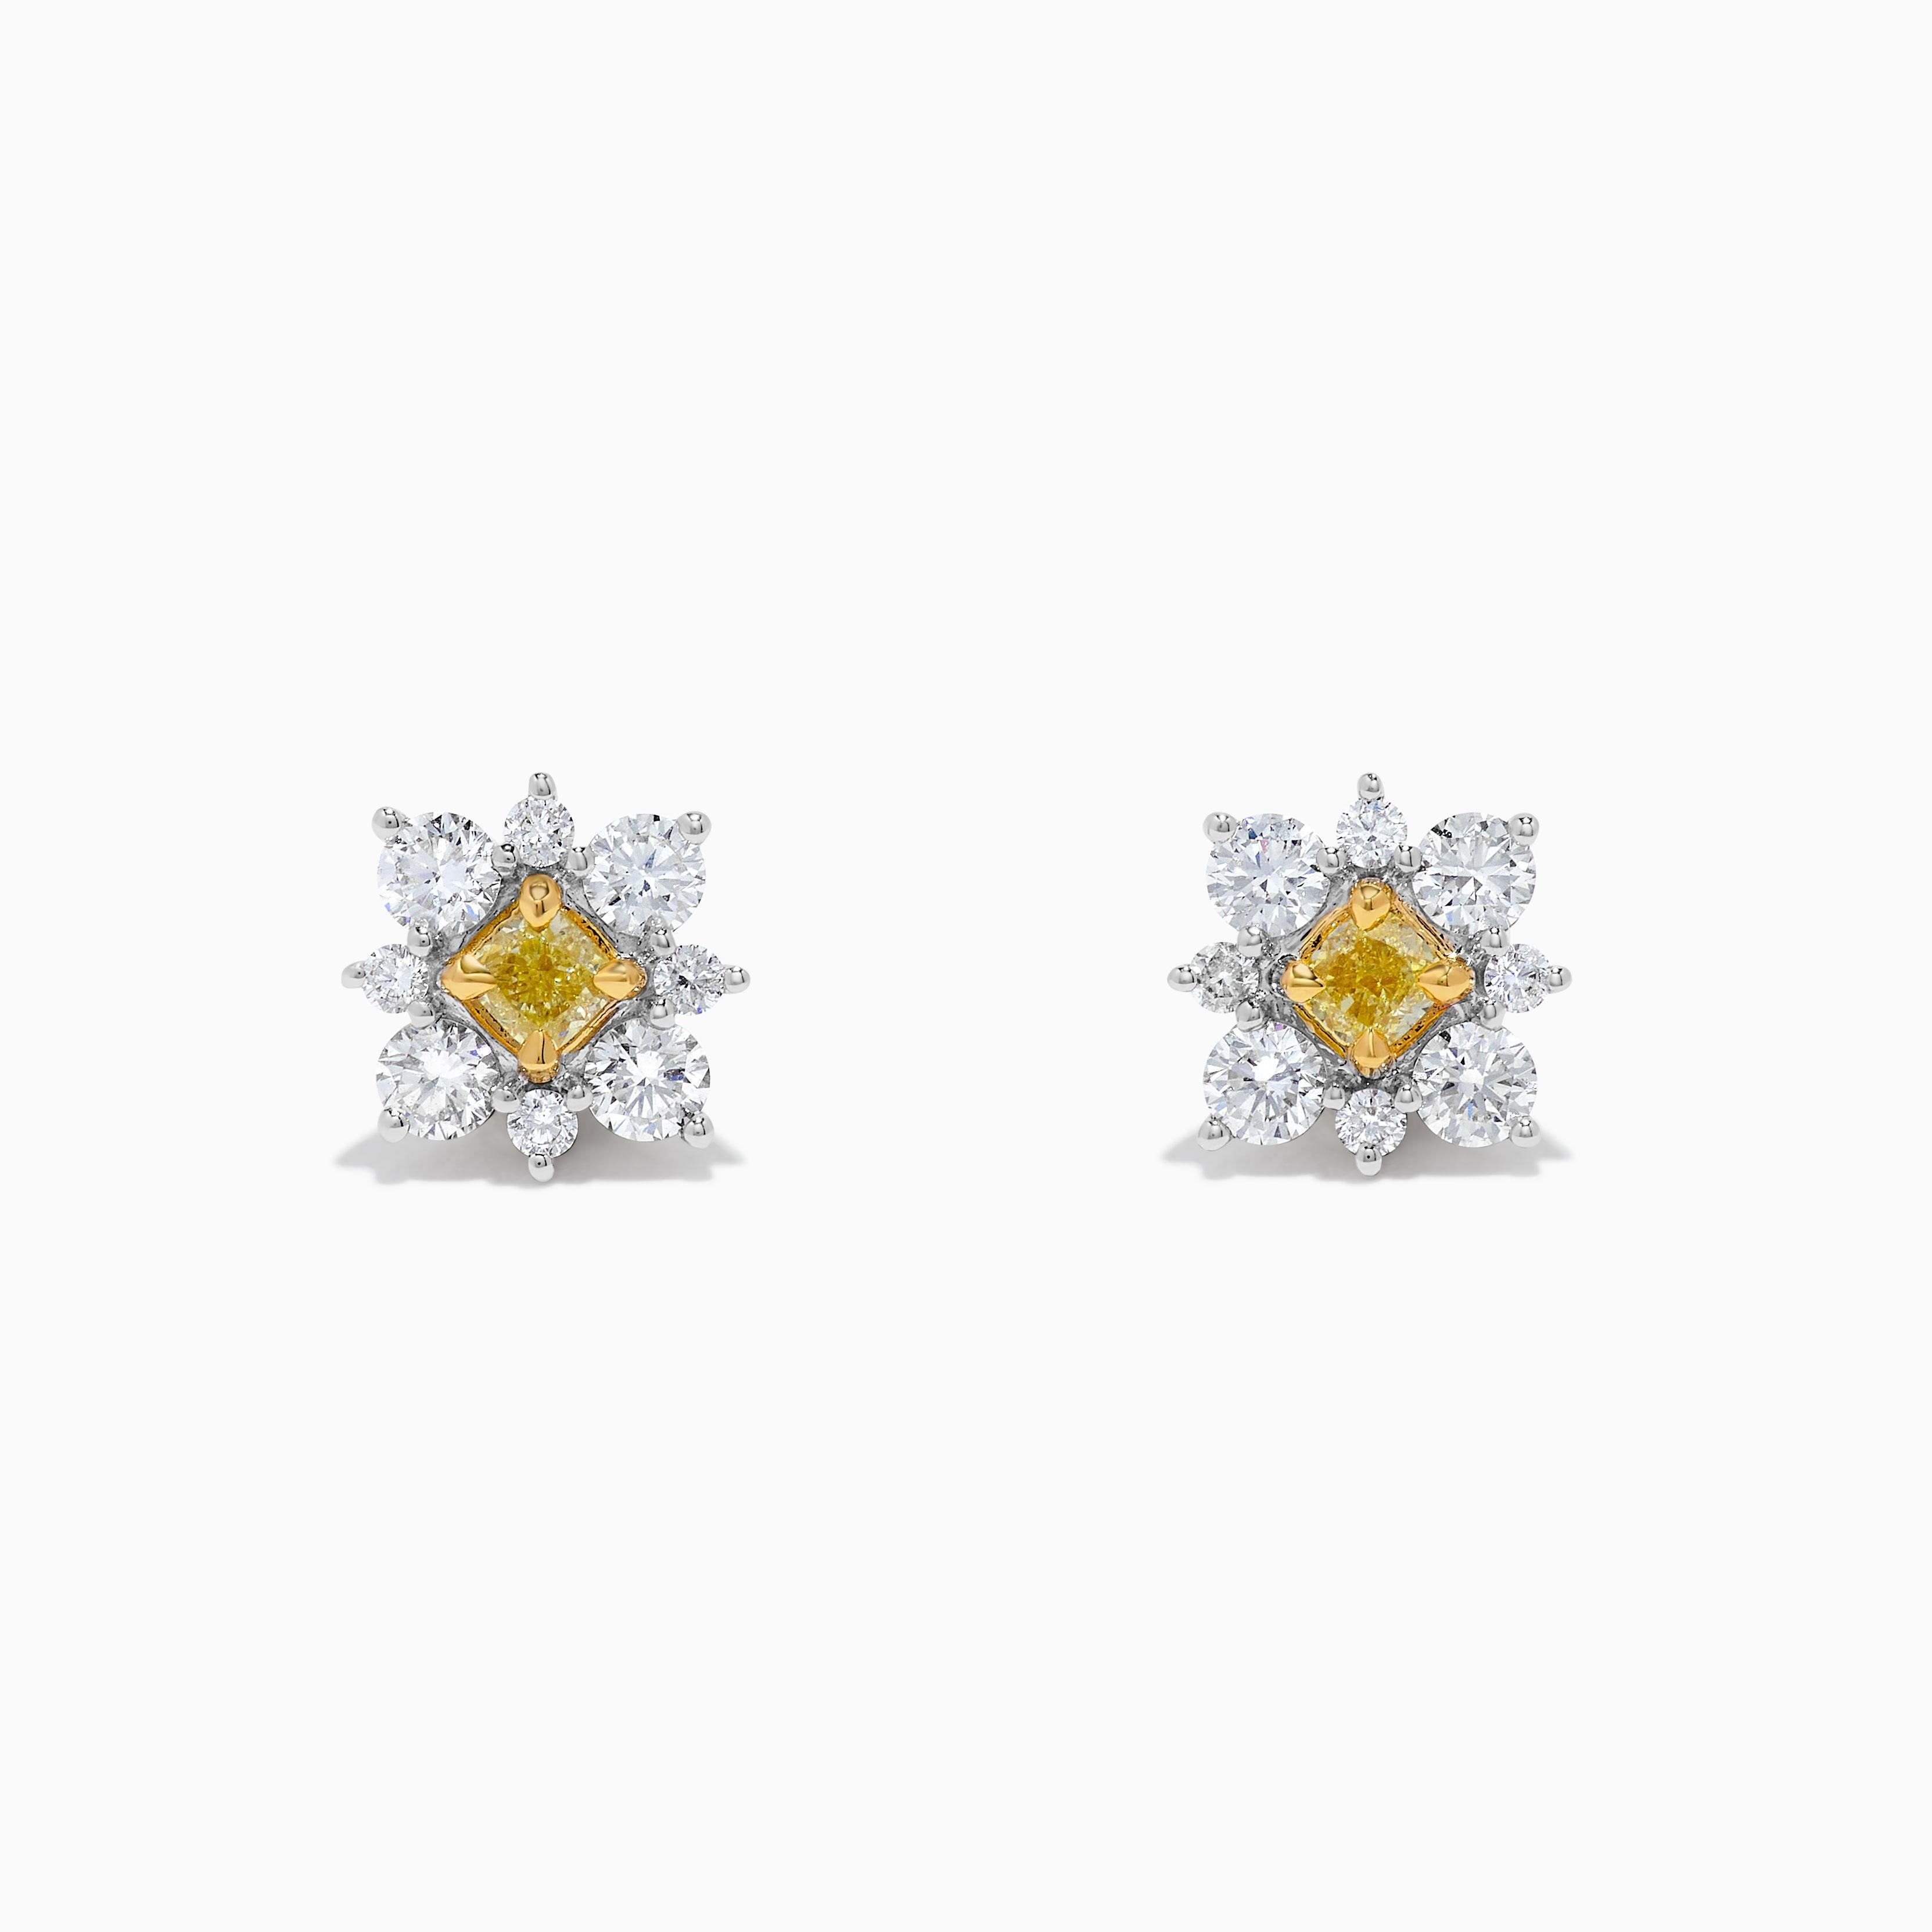 Contemporary Natural Yellow Cushion and White Diamond 1.29 Carat TW Gold Stud Earrings For Sale